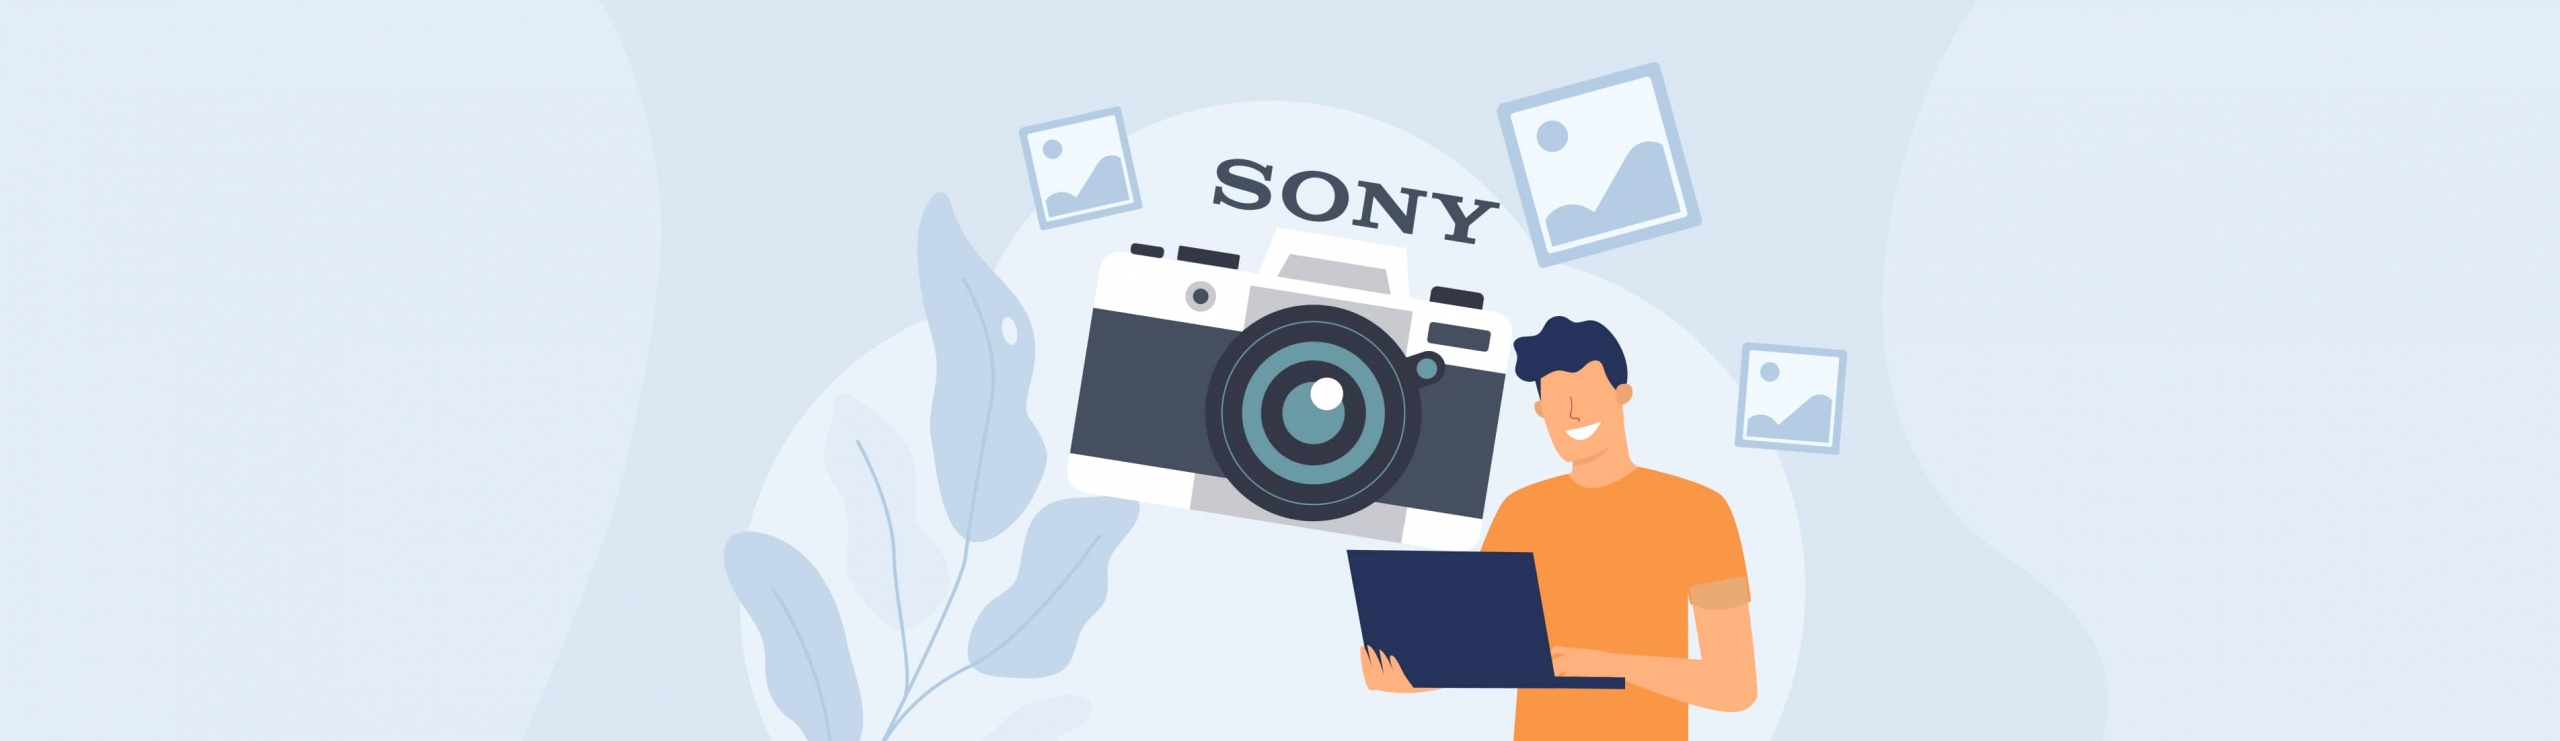 recover pictures from sony camera